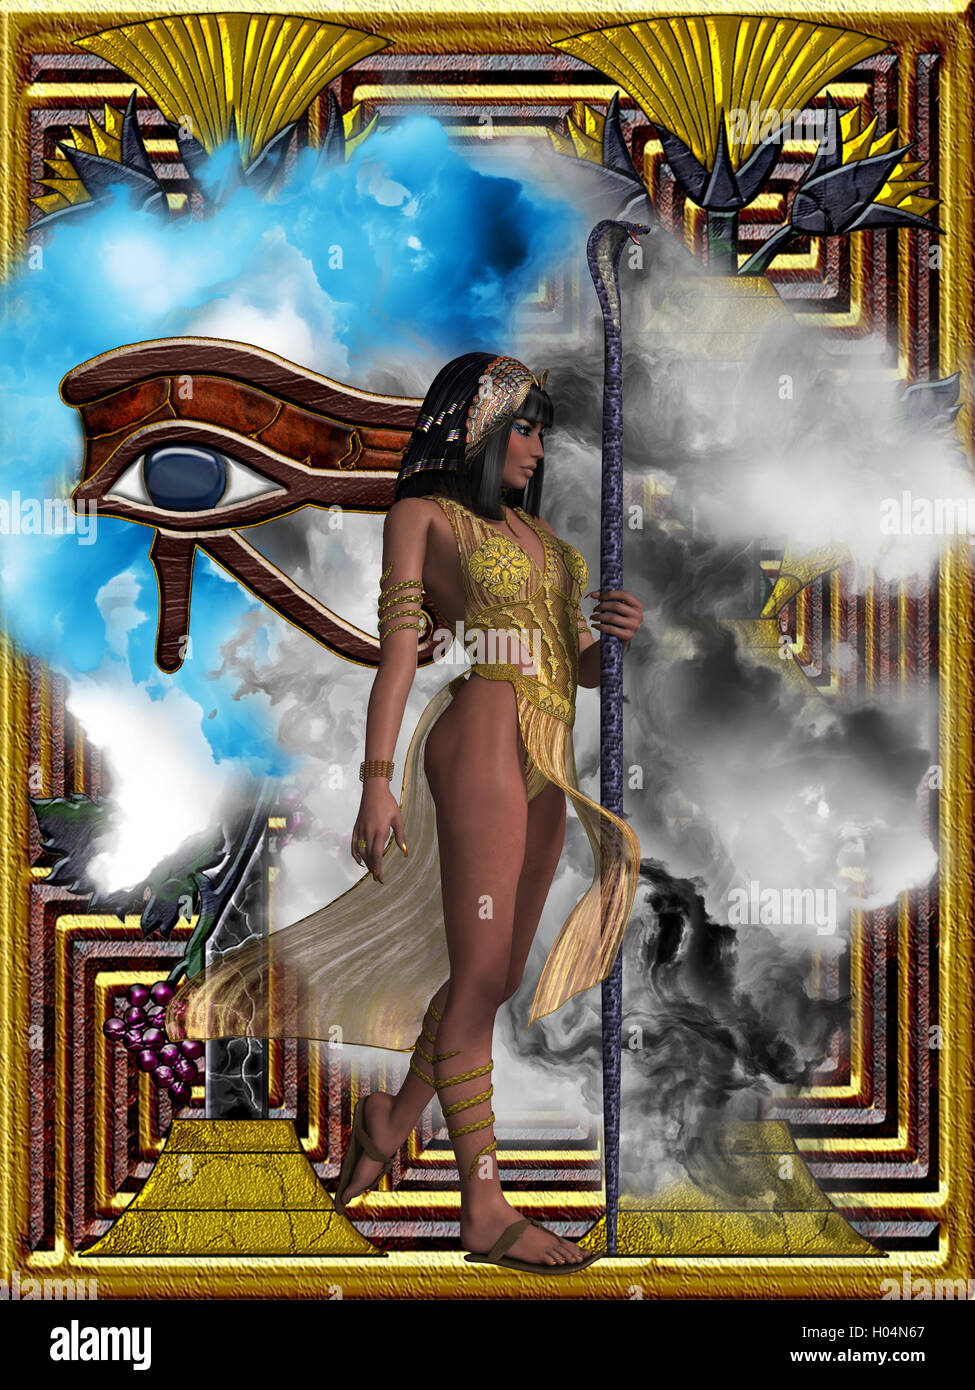 Fantasy illustration of the Eye of Ra or Horus and an Egyptian queen with headdress and snake staff. Stock Photo